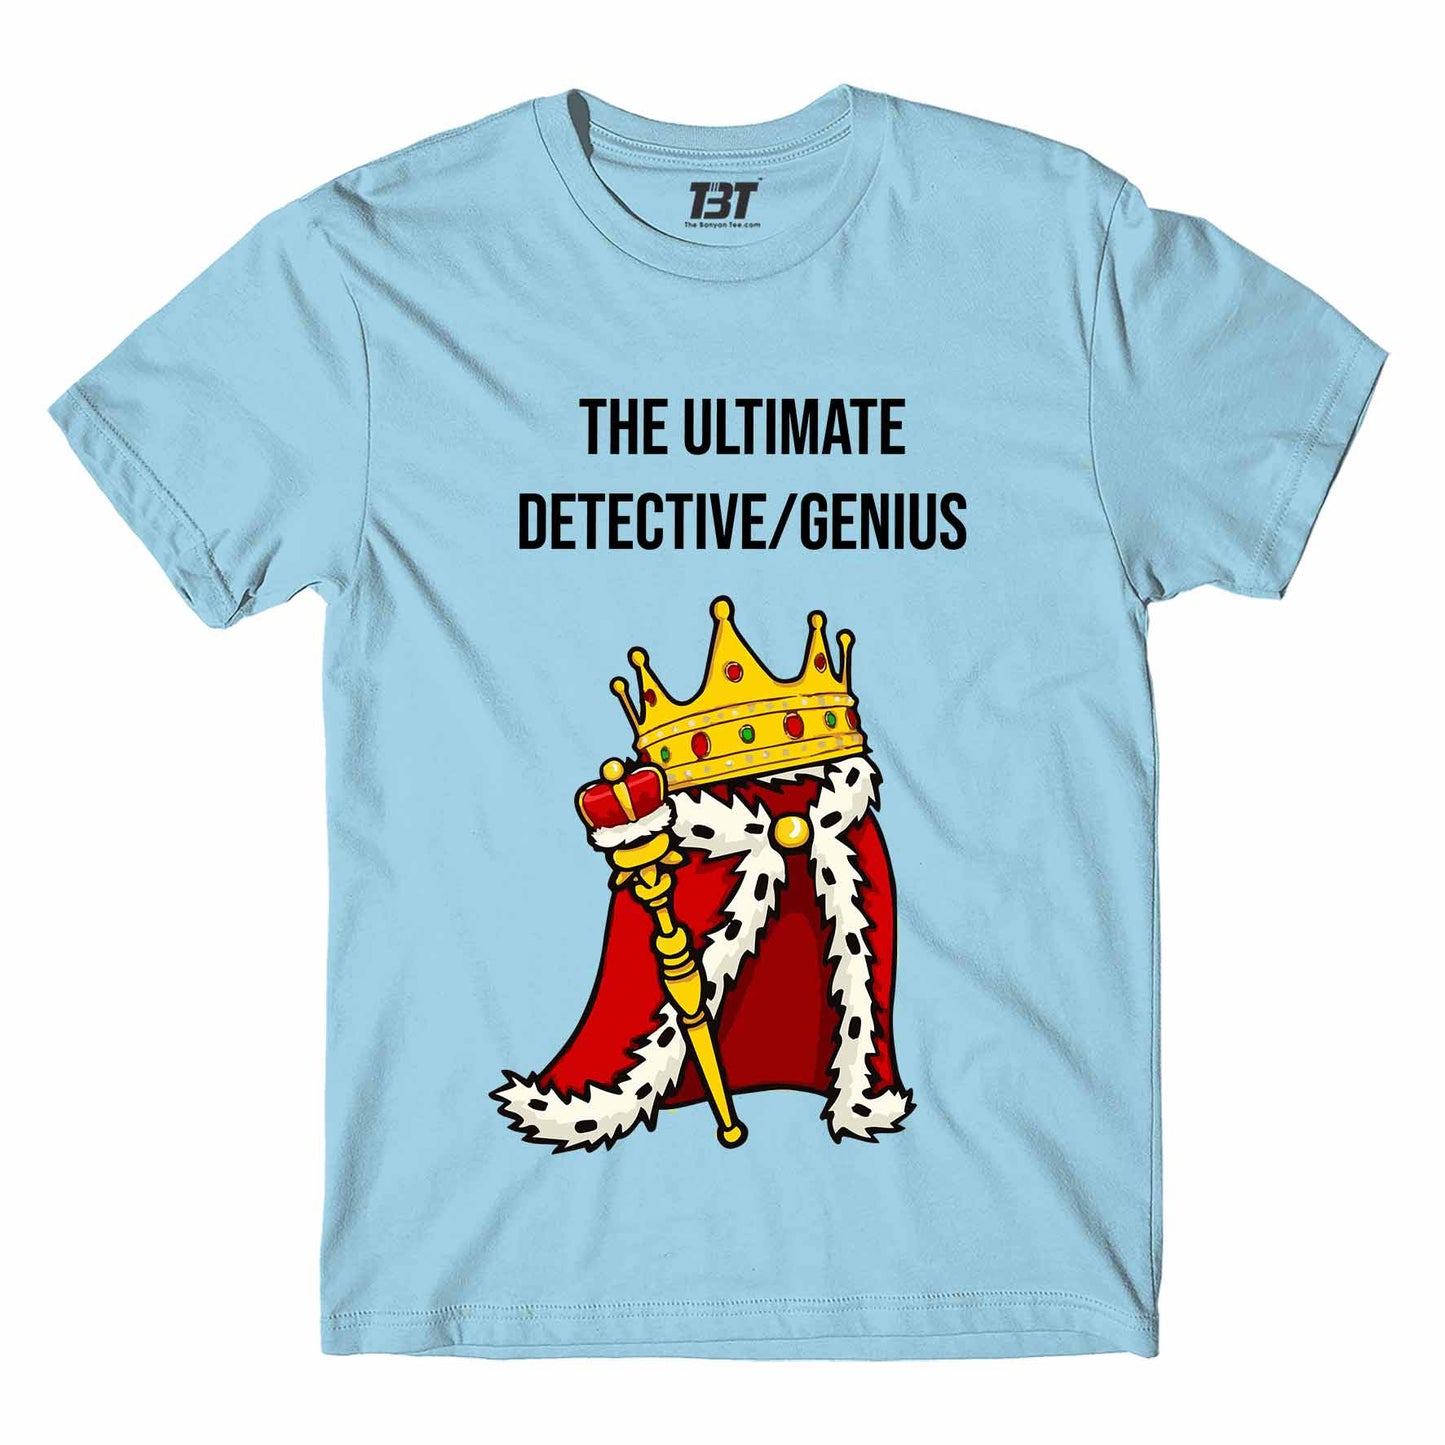 brooklyn nine-nine the ultimate genius t-shirt buy online united states usa the banyan tee tbt men women girls boys unisex Sky Blue detective jake peralta terry charles boyle gina linetti andy samberg merchandise clothing acceessories